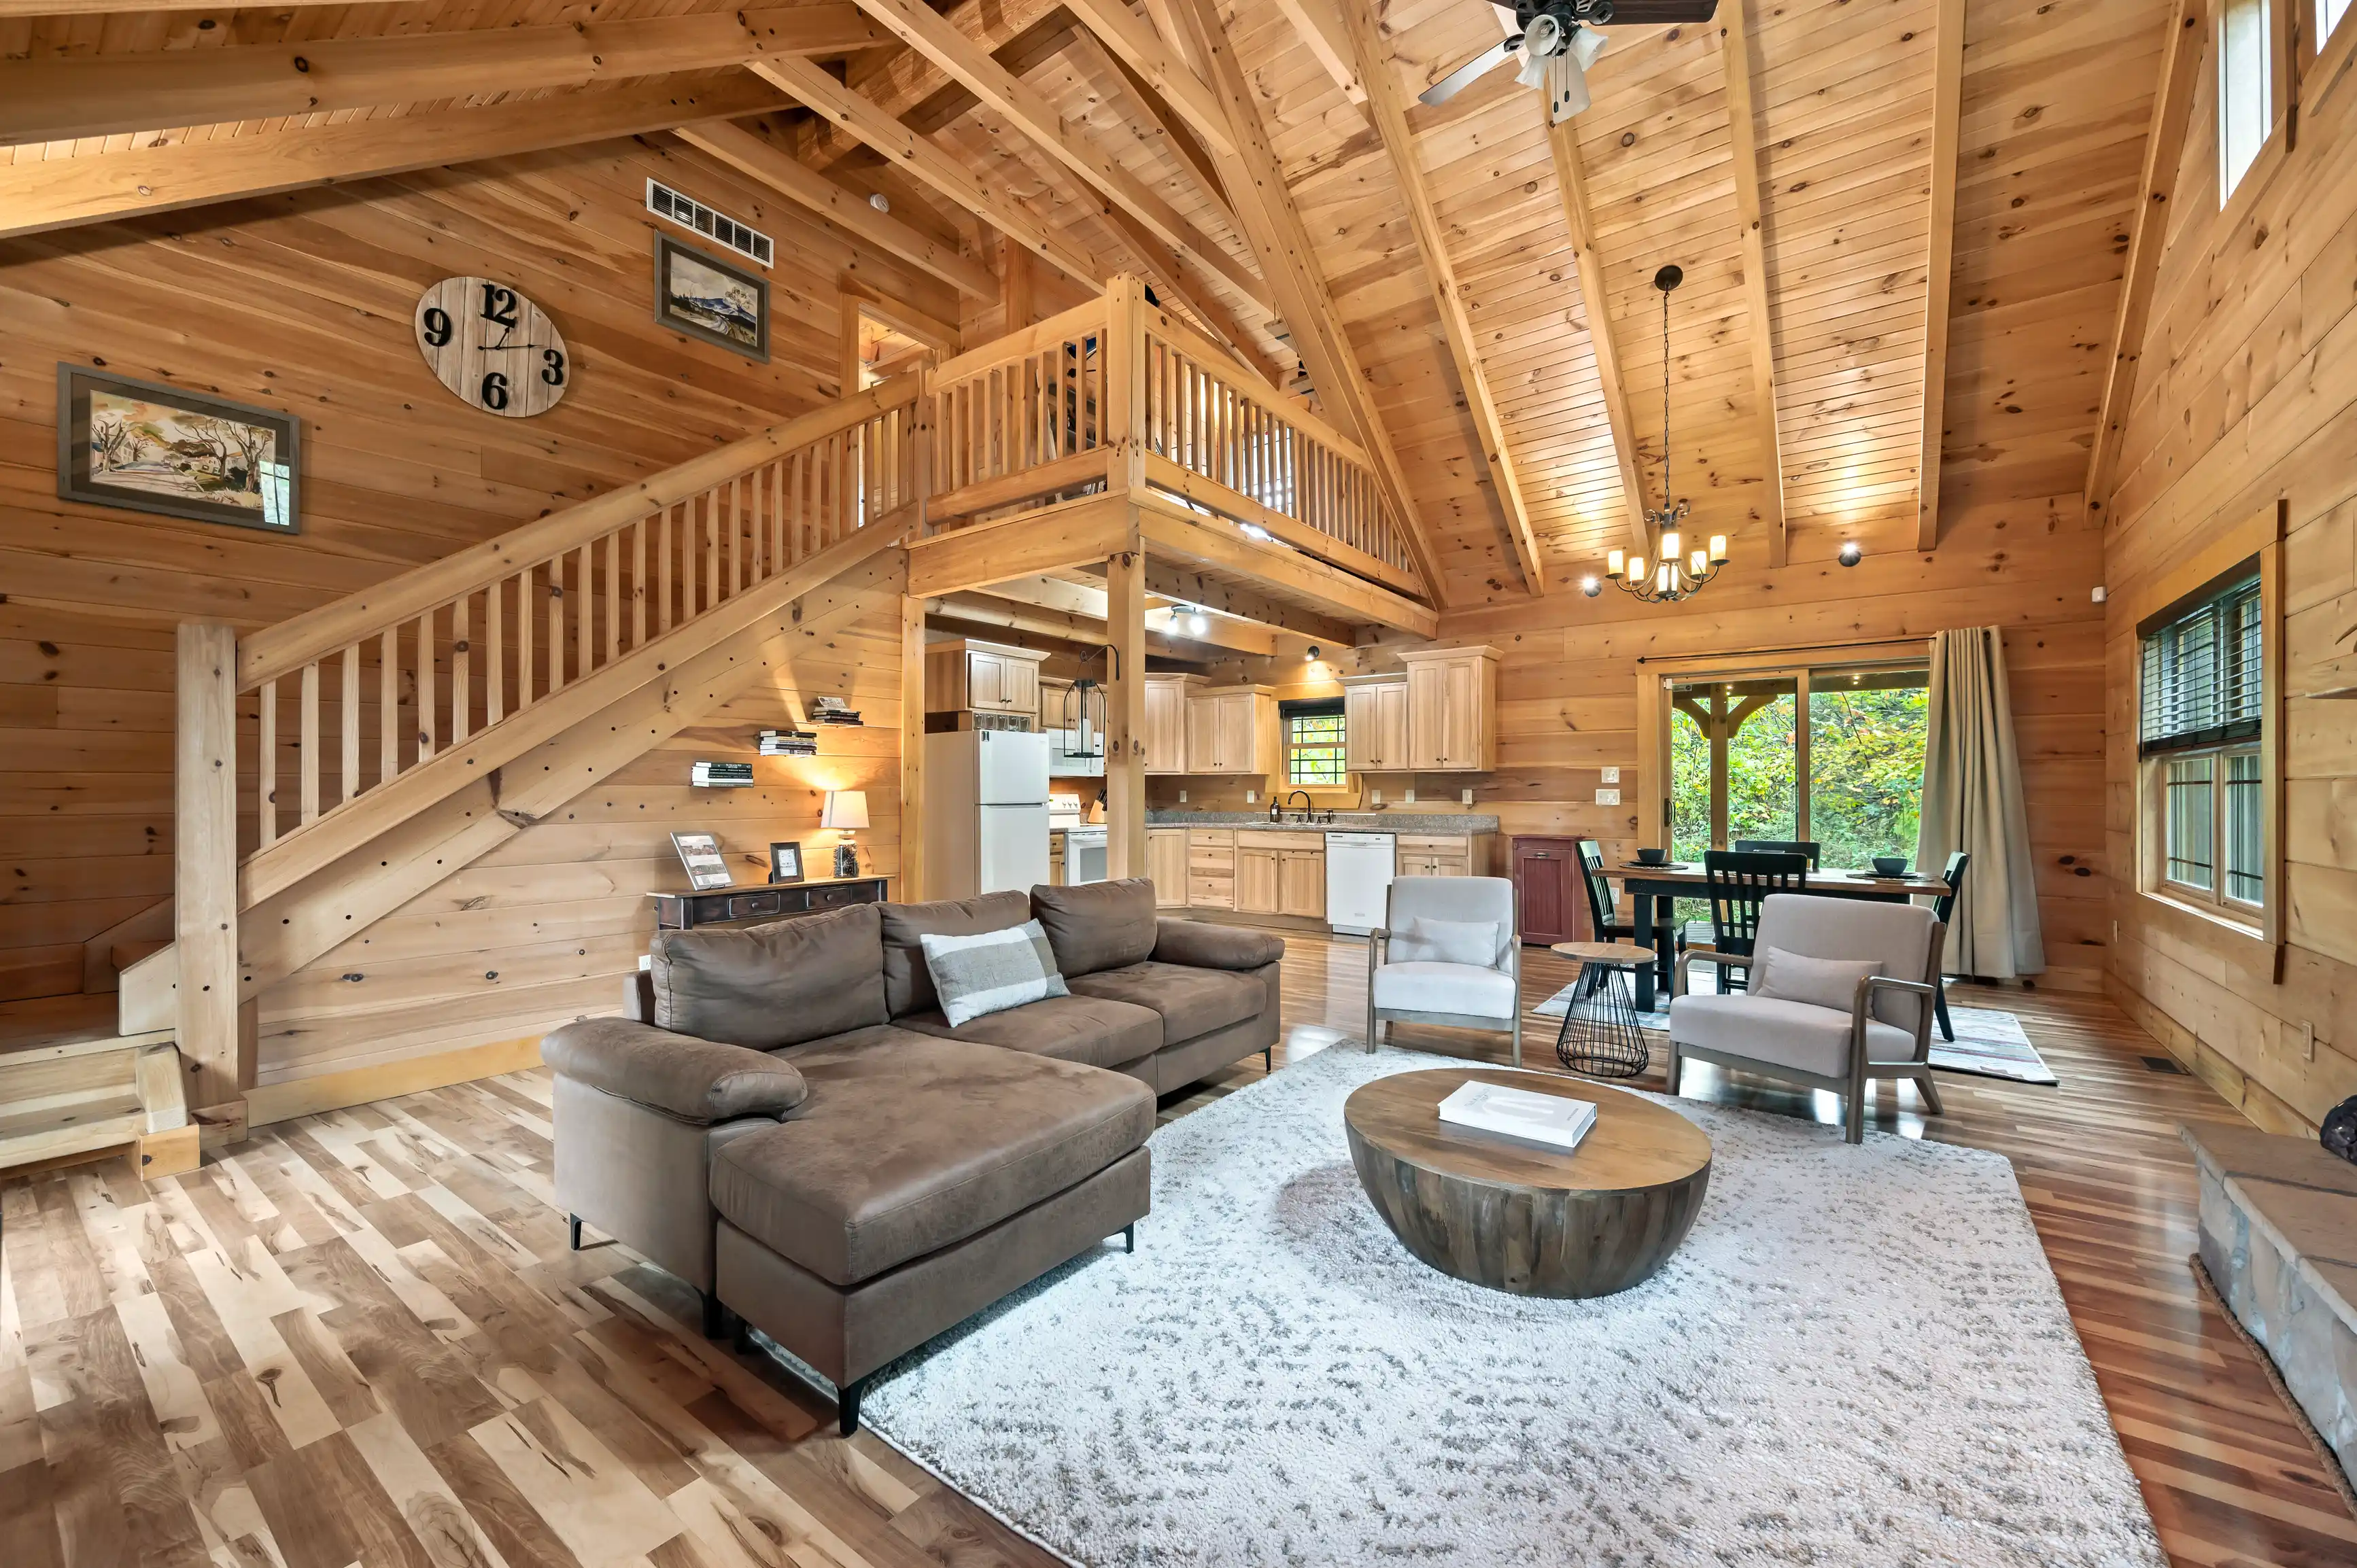 Spacious wooden cabin interior with high ceilings, loft area, open concept living room and kitchen, large sectional sofa, and rustic decor.